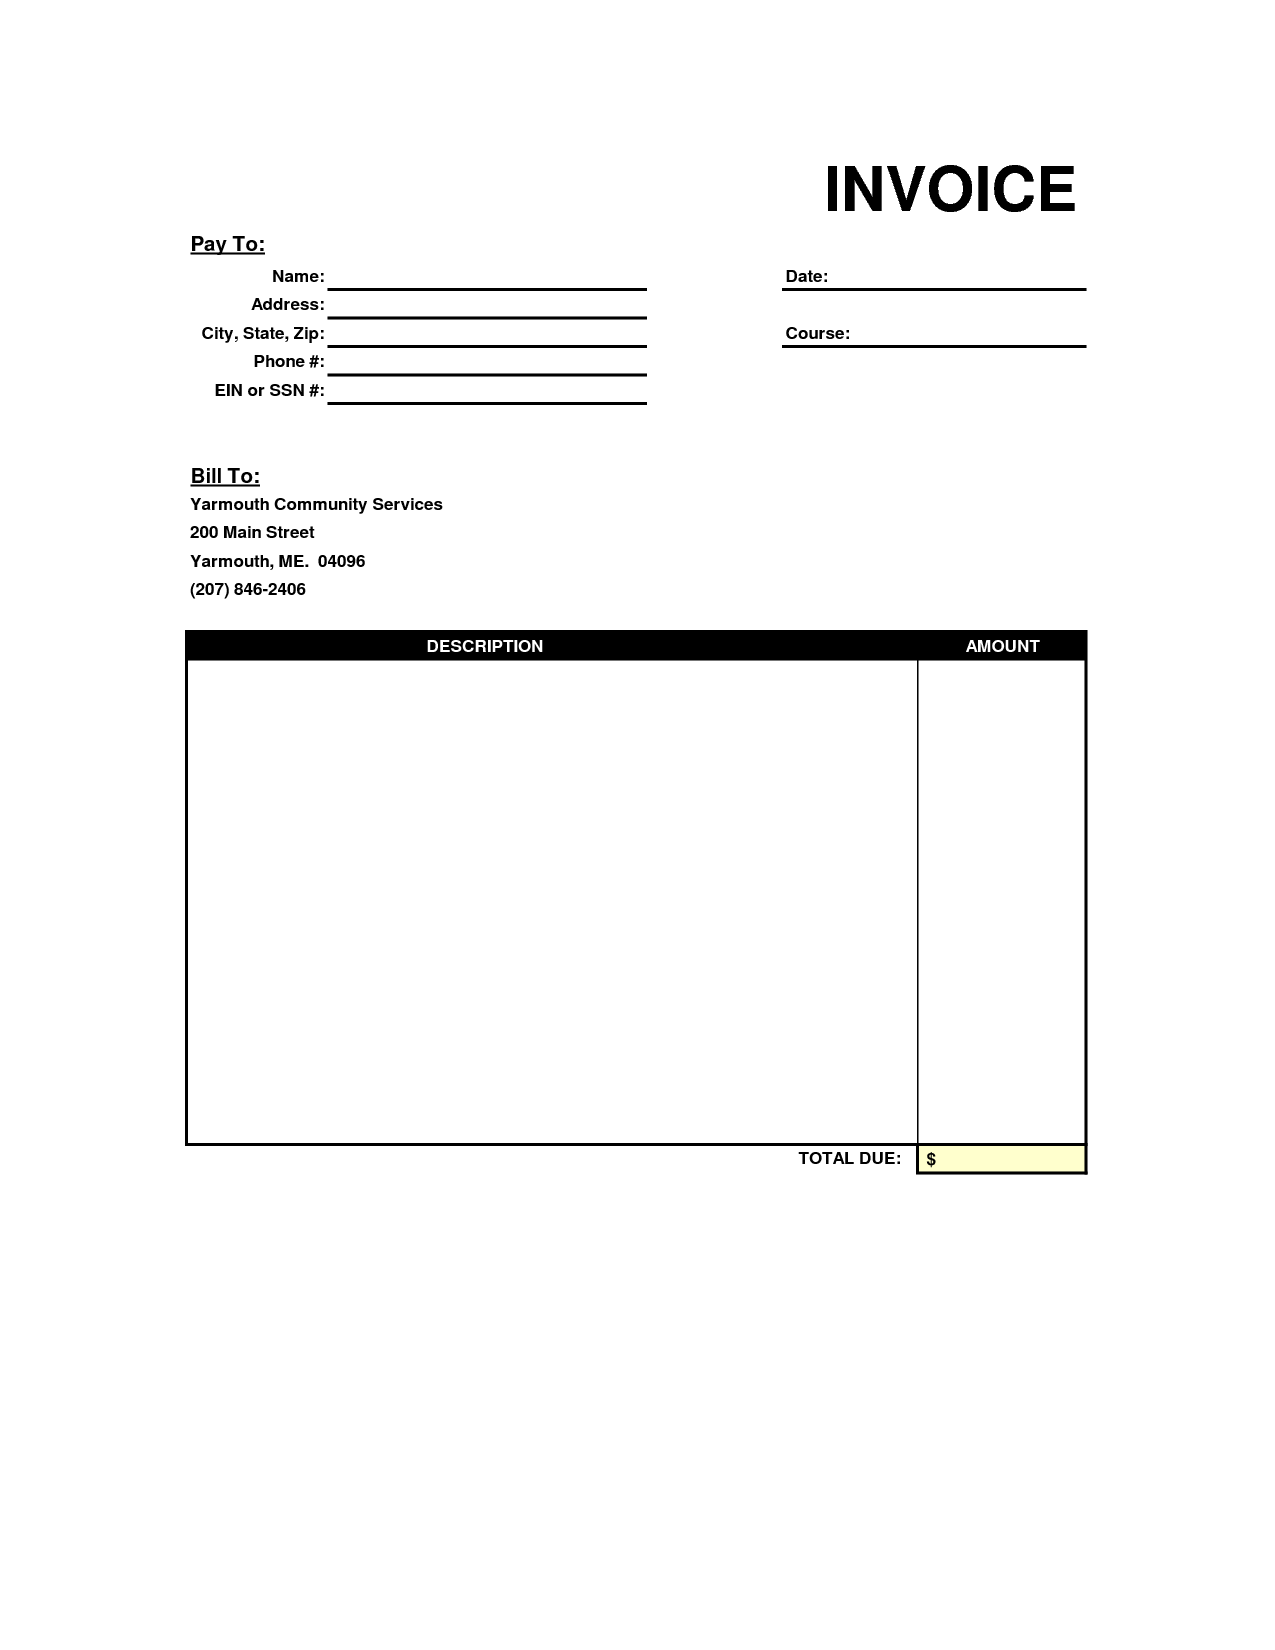 50 Free Blank Invoice Forms Printable Layouts by Blank Invoice Forms Printable